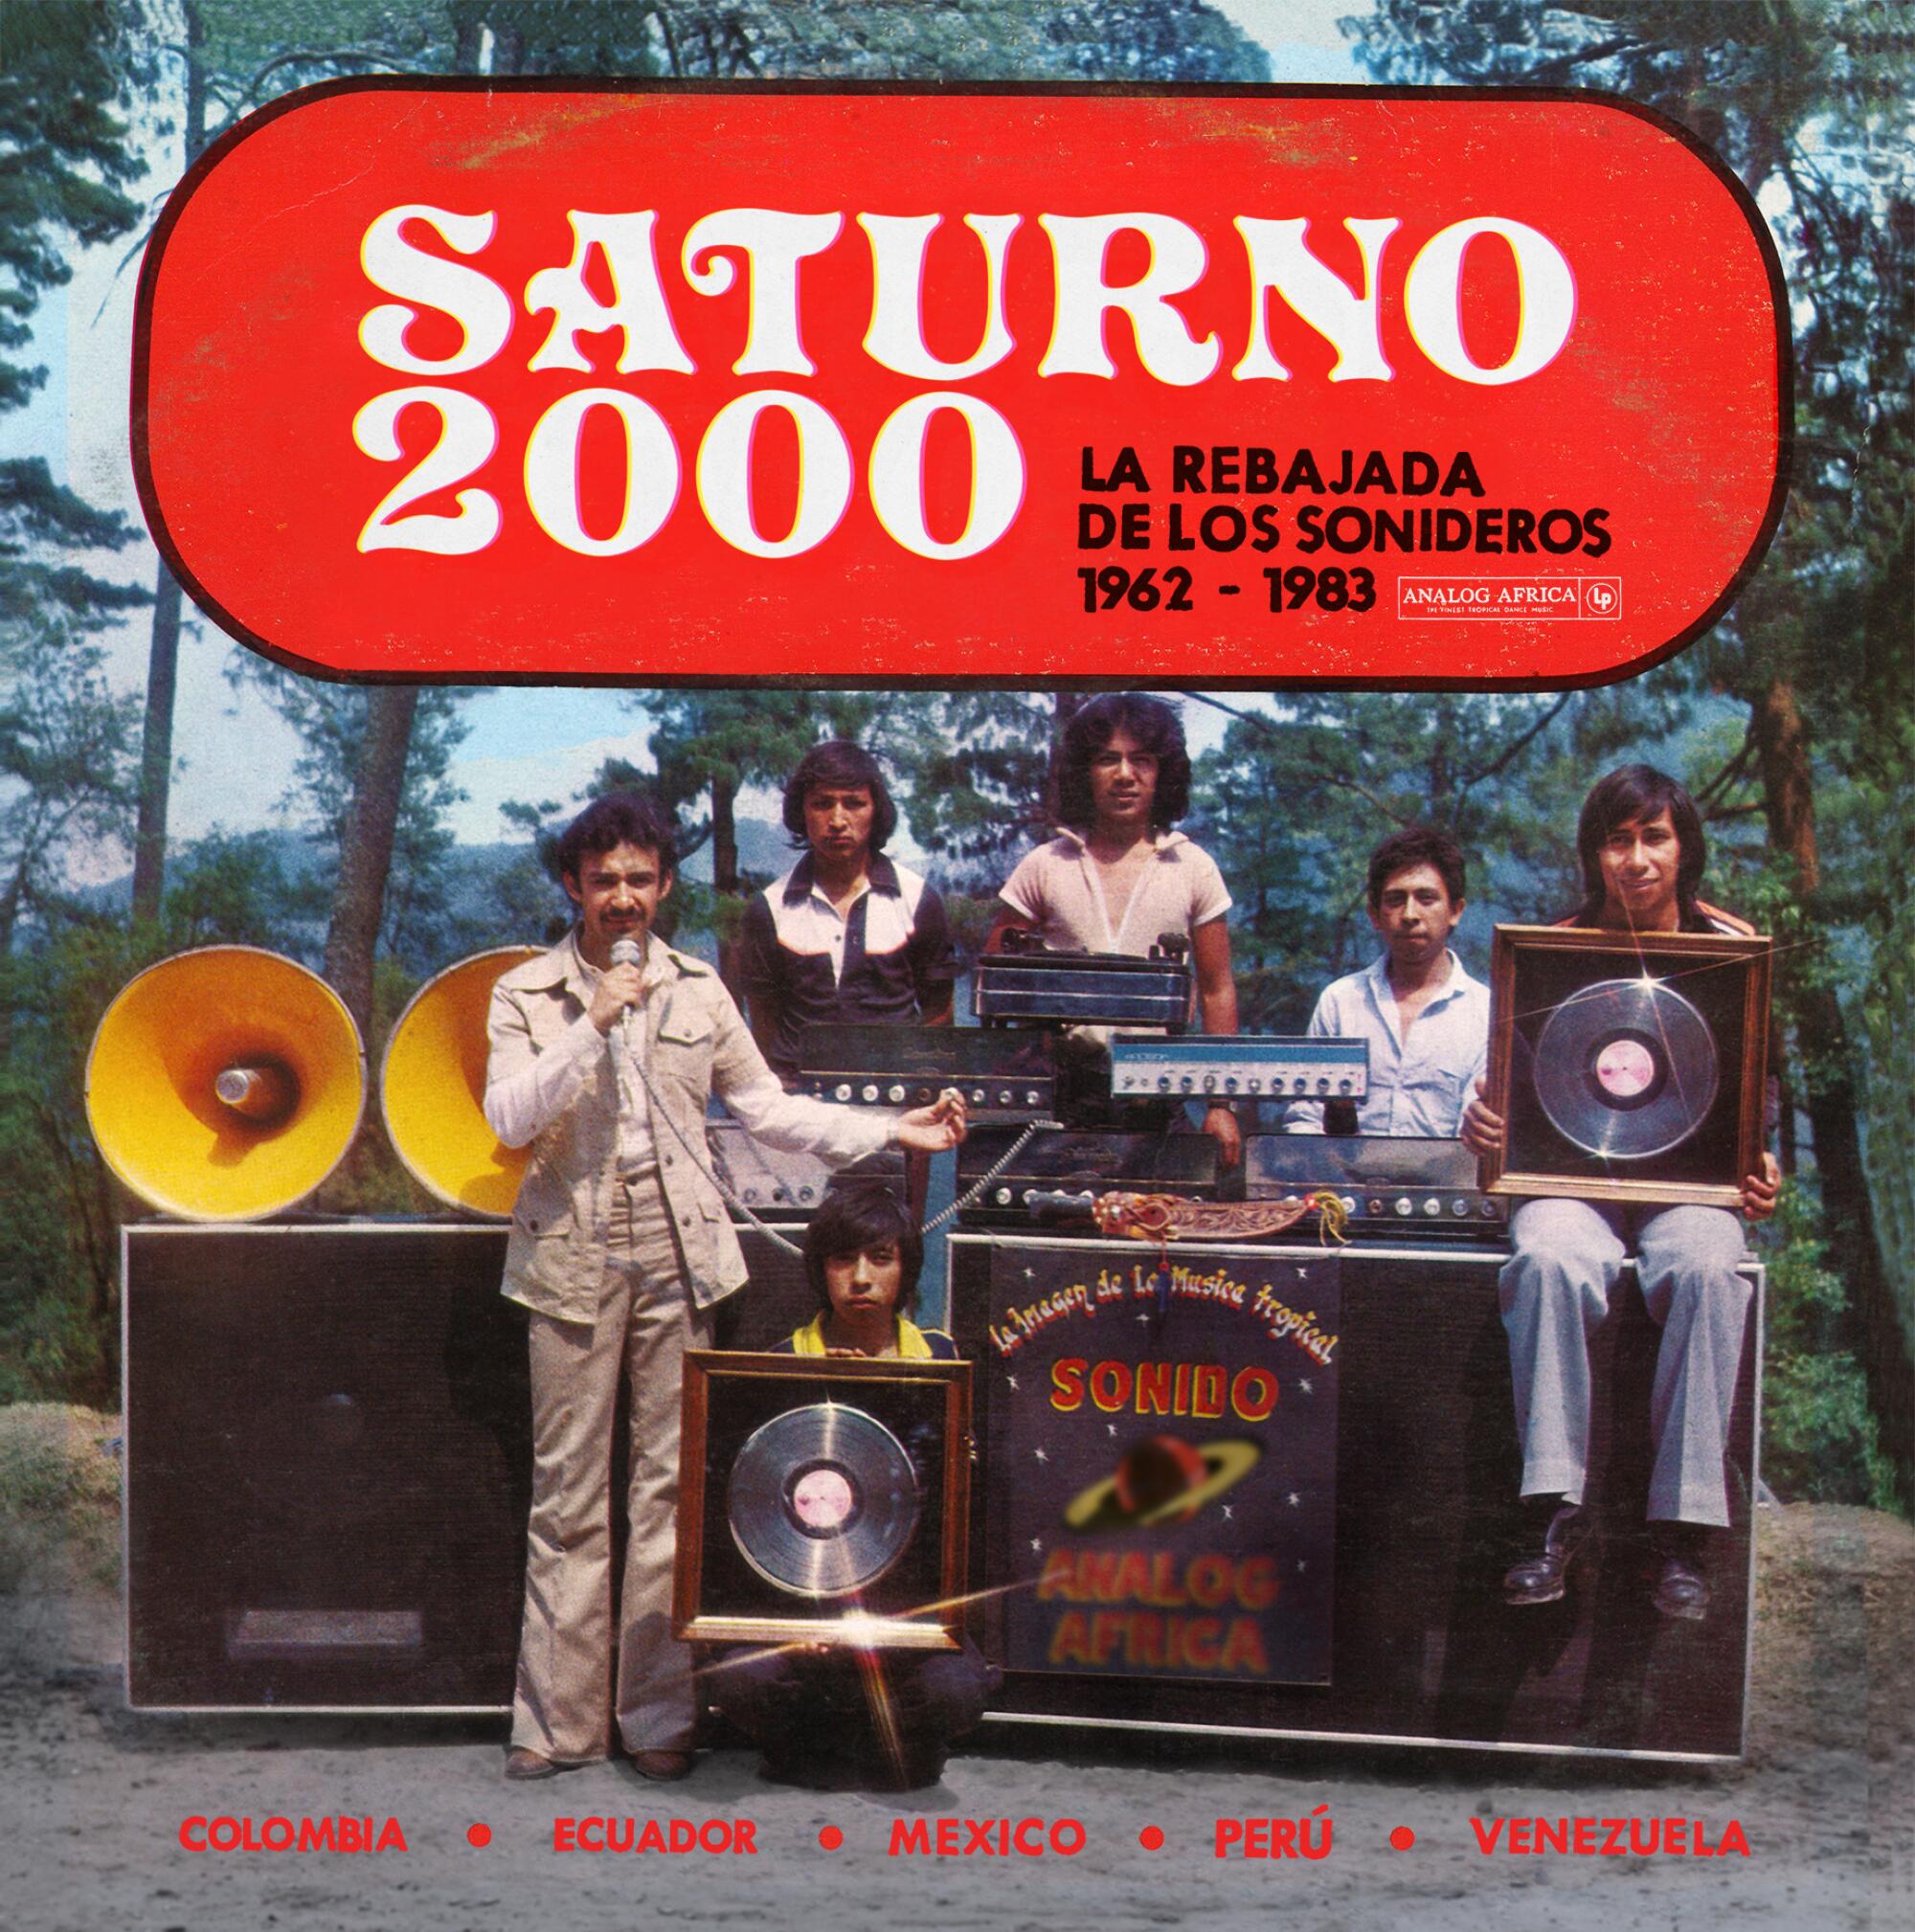 An album cover shows a vintage photo of Latin American DJs sitting on a speaker stack outdoors